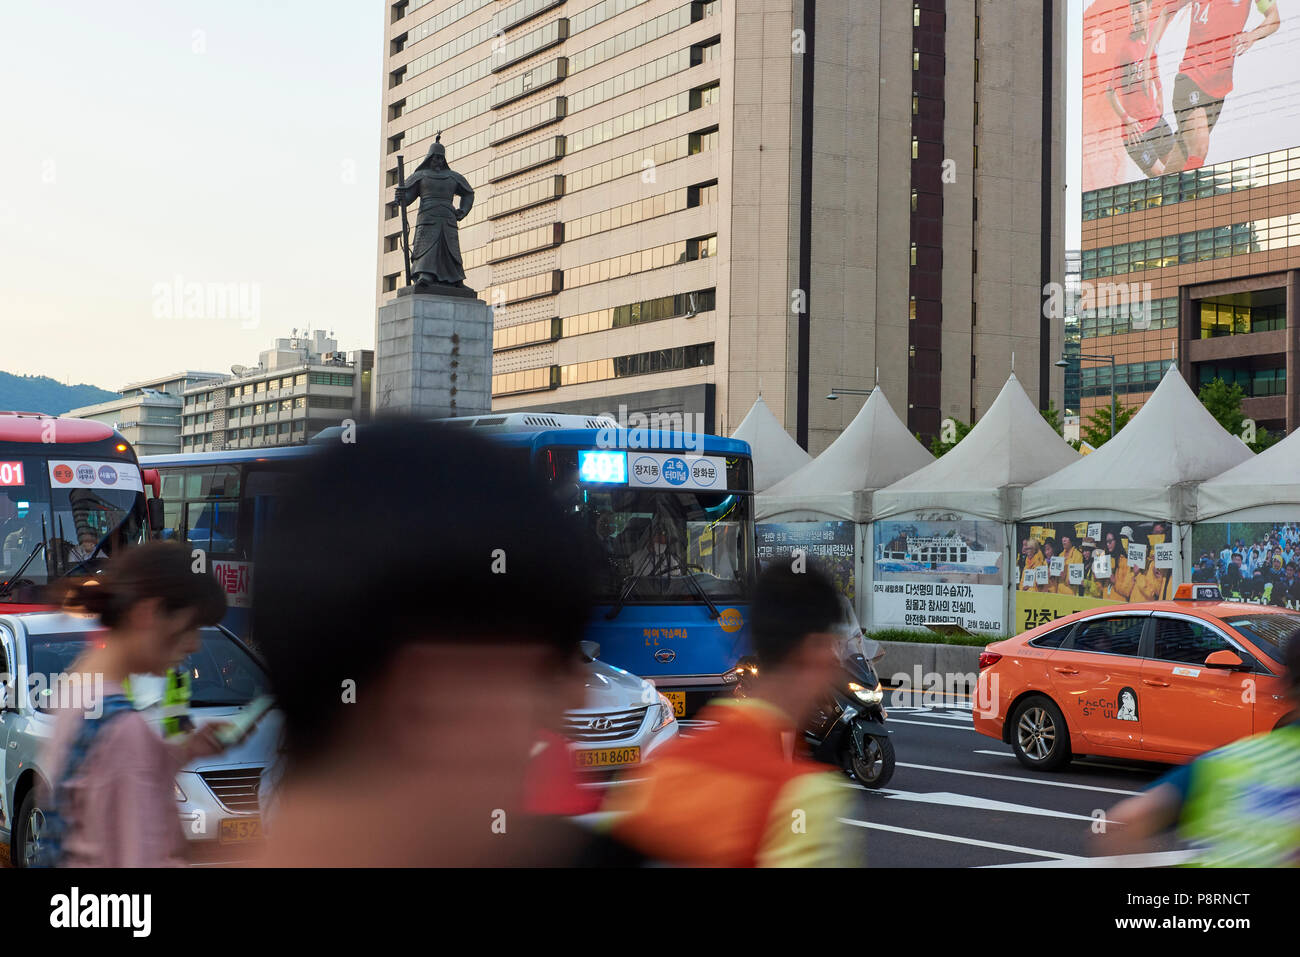 Statue of Admiral Yi Sun-Shin in Gwanghwamun, Seoul, South Korea, with motion blurred pedestrians crossing the street in the foreground. Stock Photo